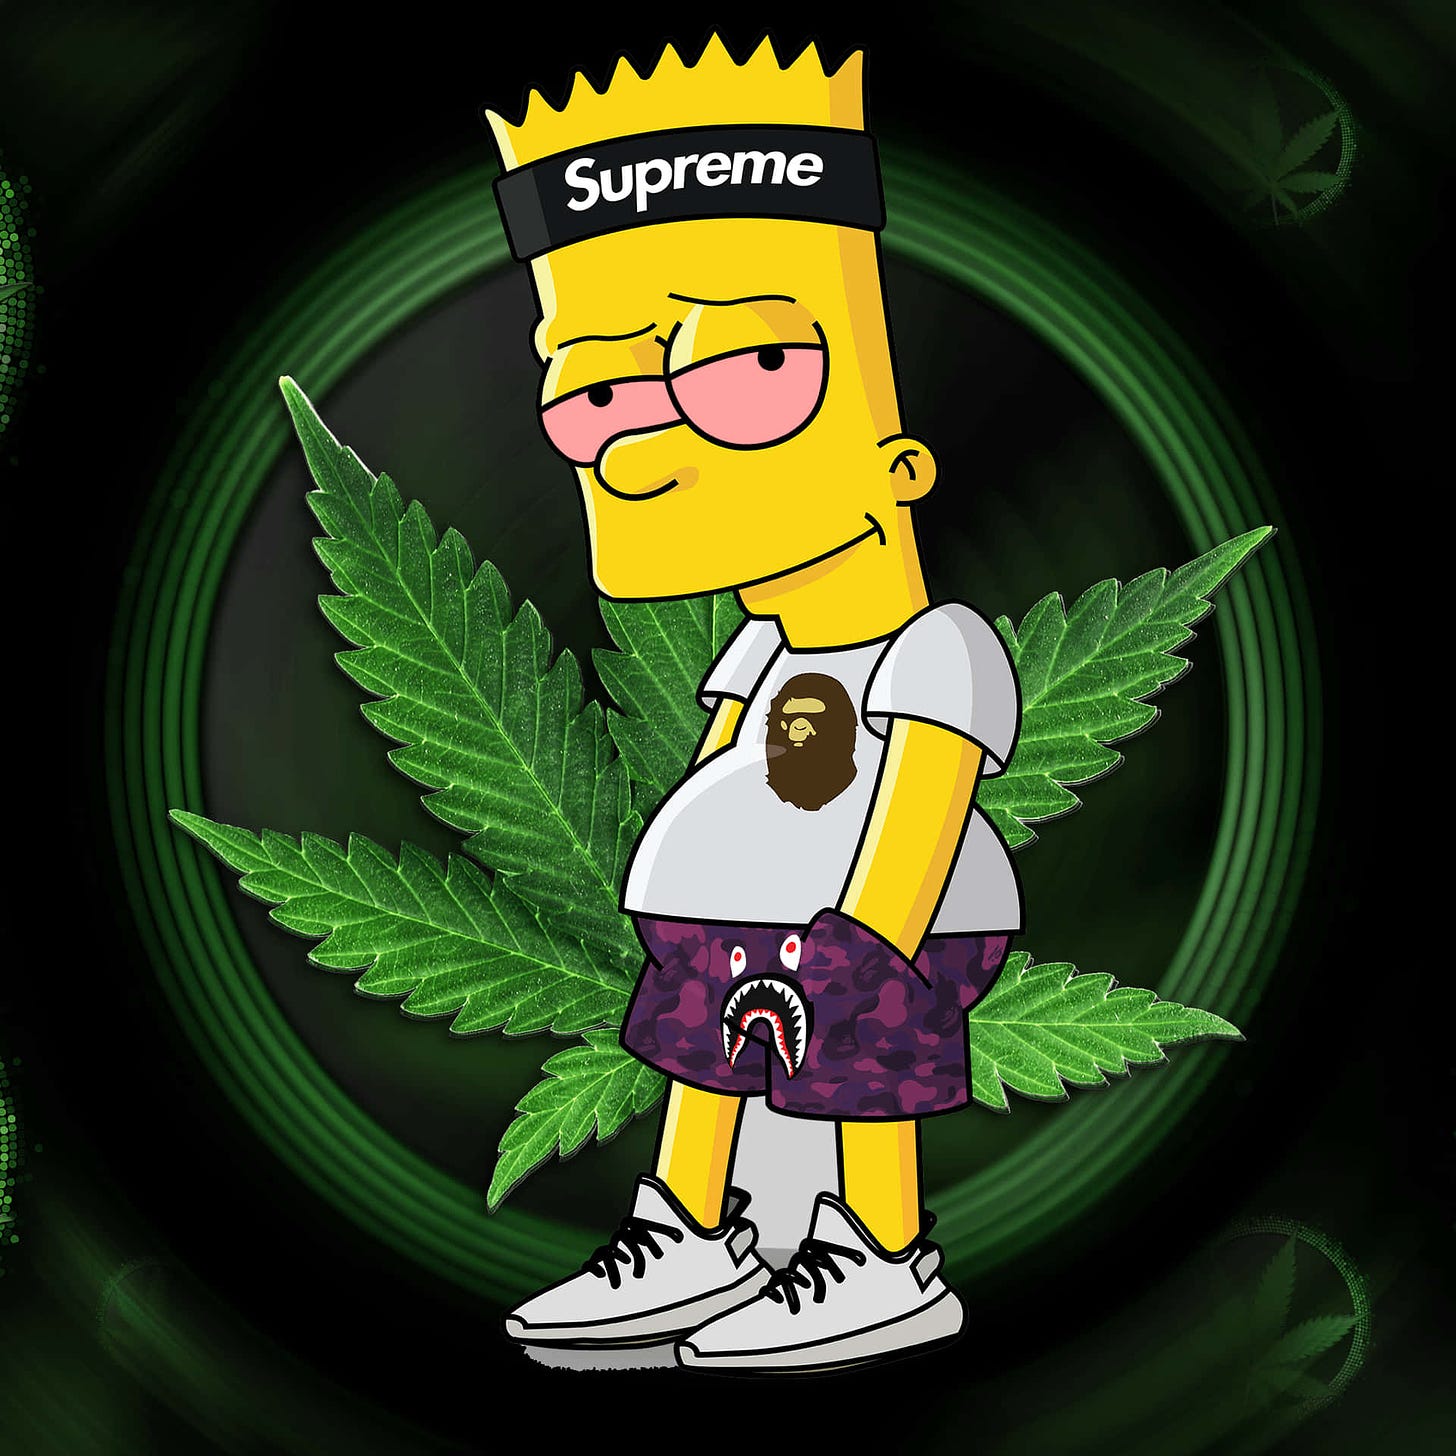 100+] Bart Simpson Weed Wallpapers | Wallpapers.com